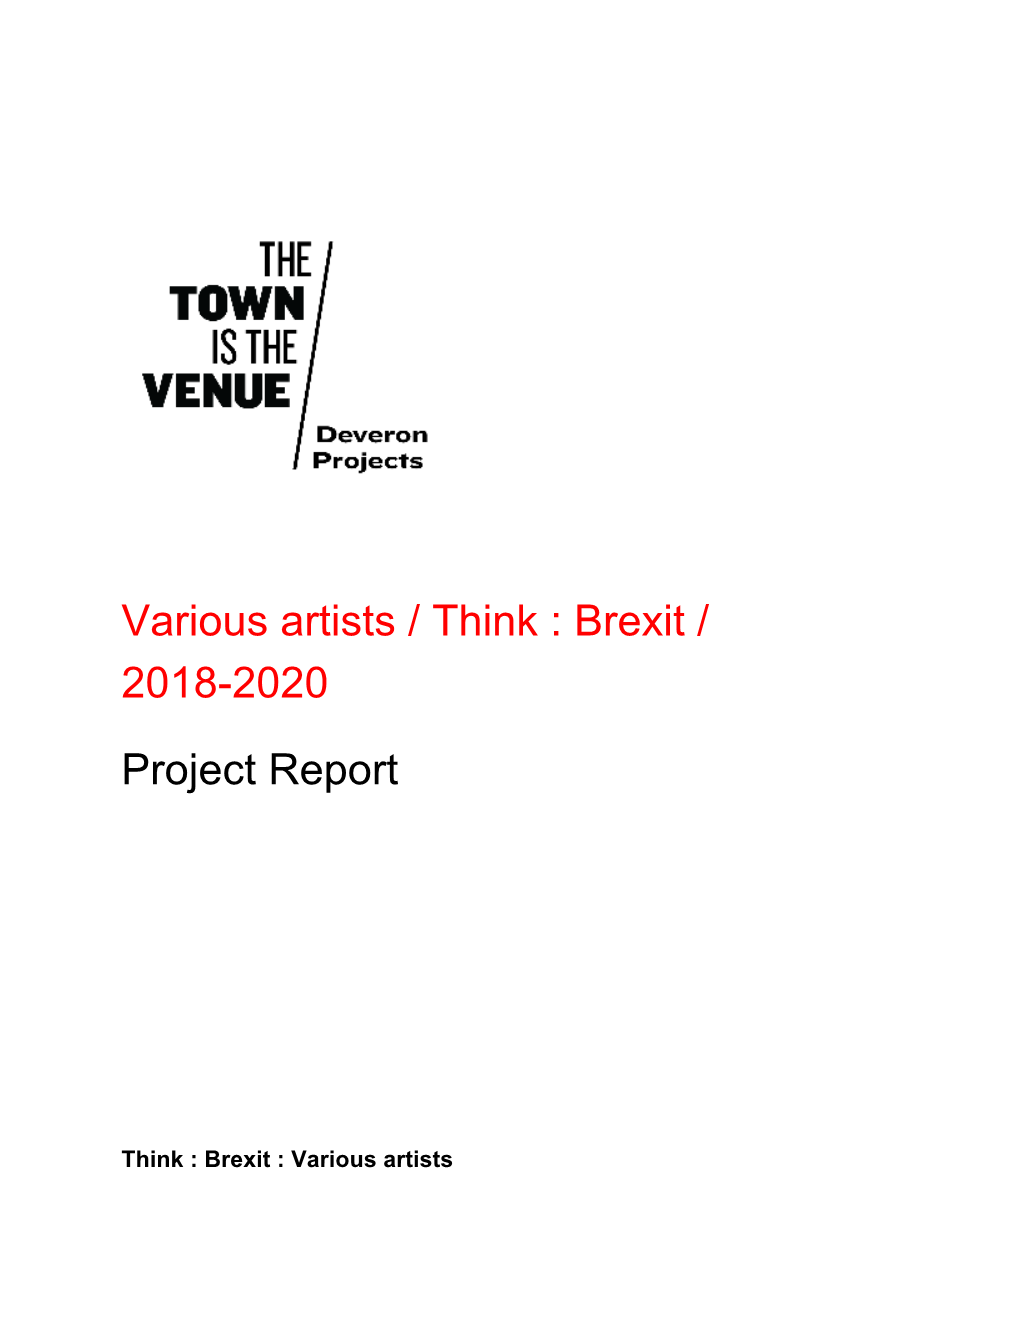 Think : Brexit Project Report